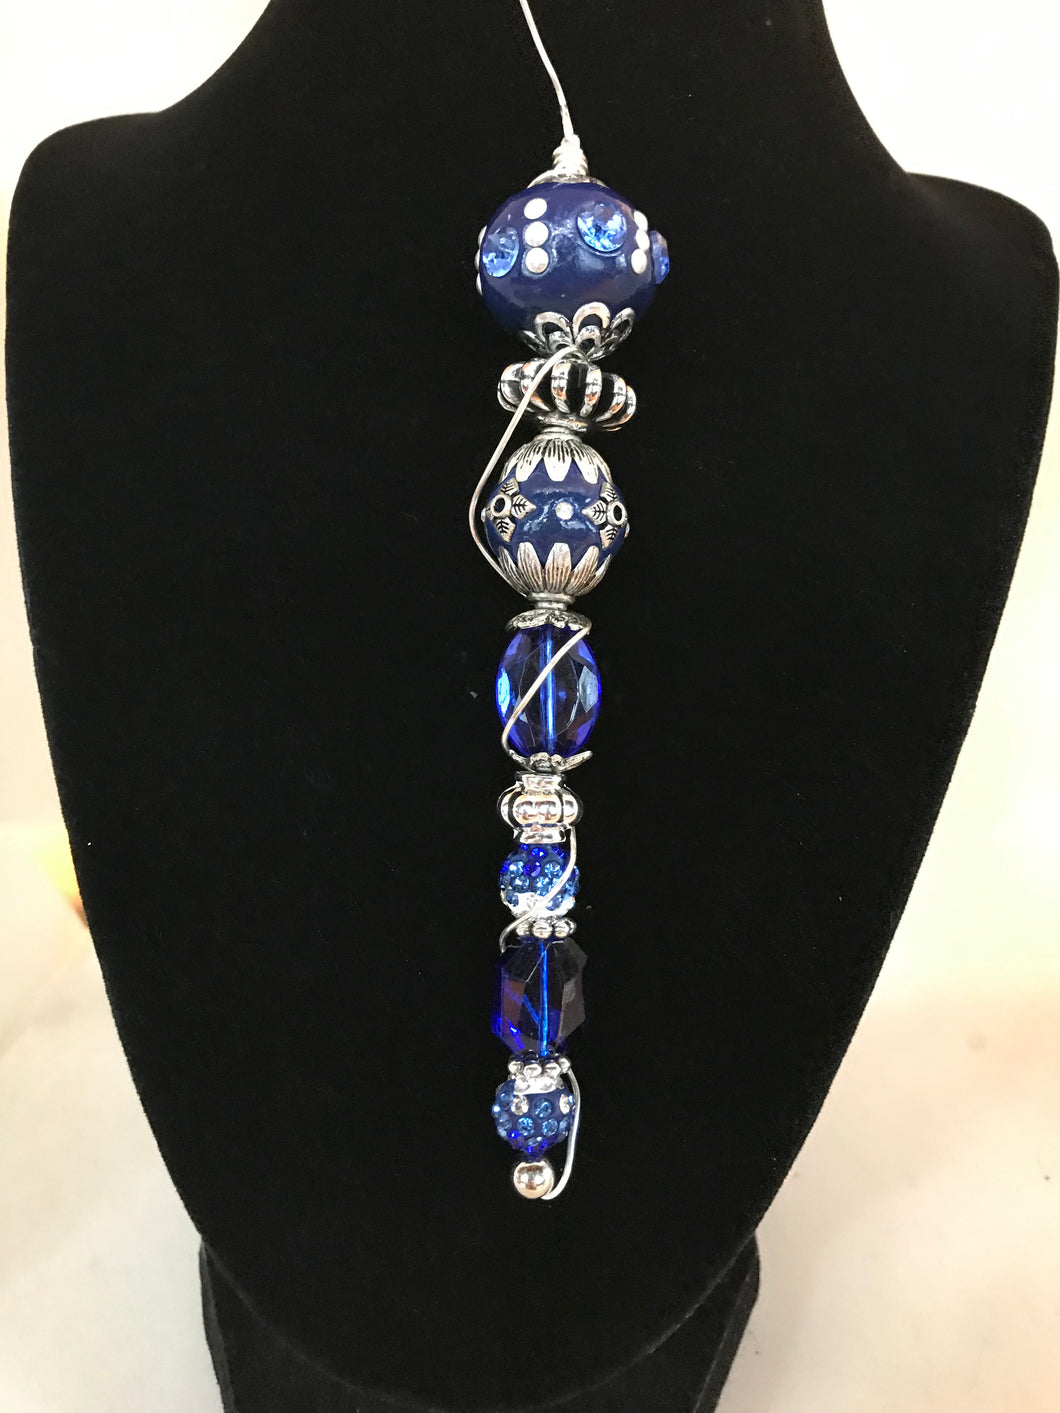 Royal blue/silver icicle ornament